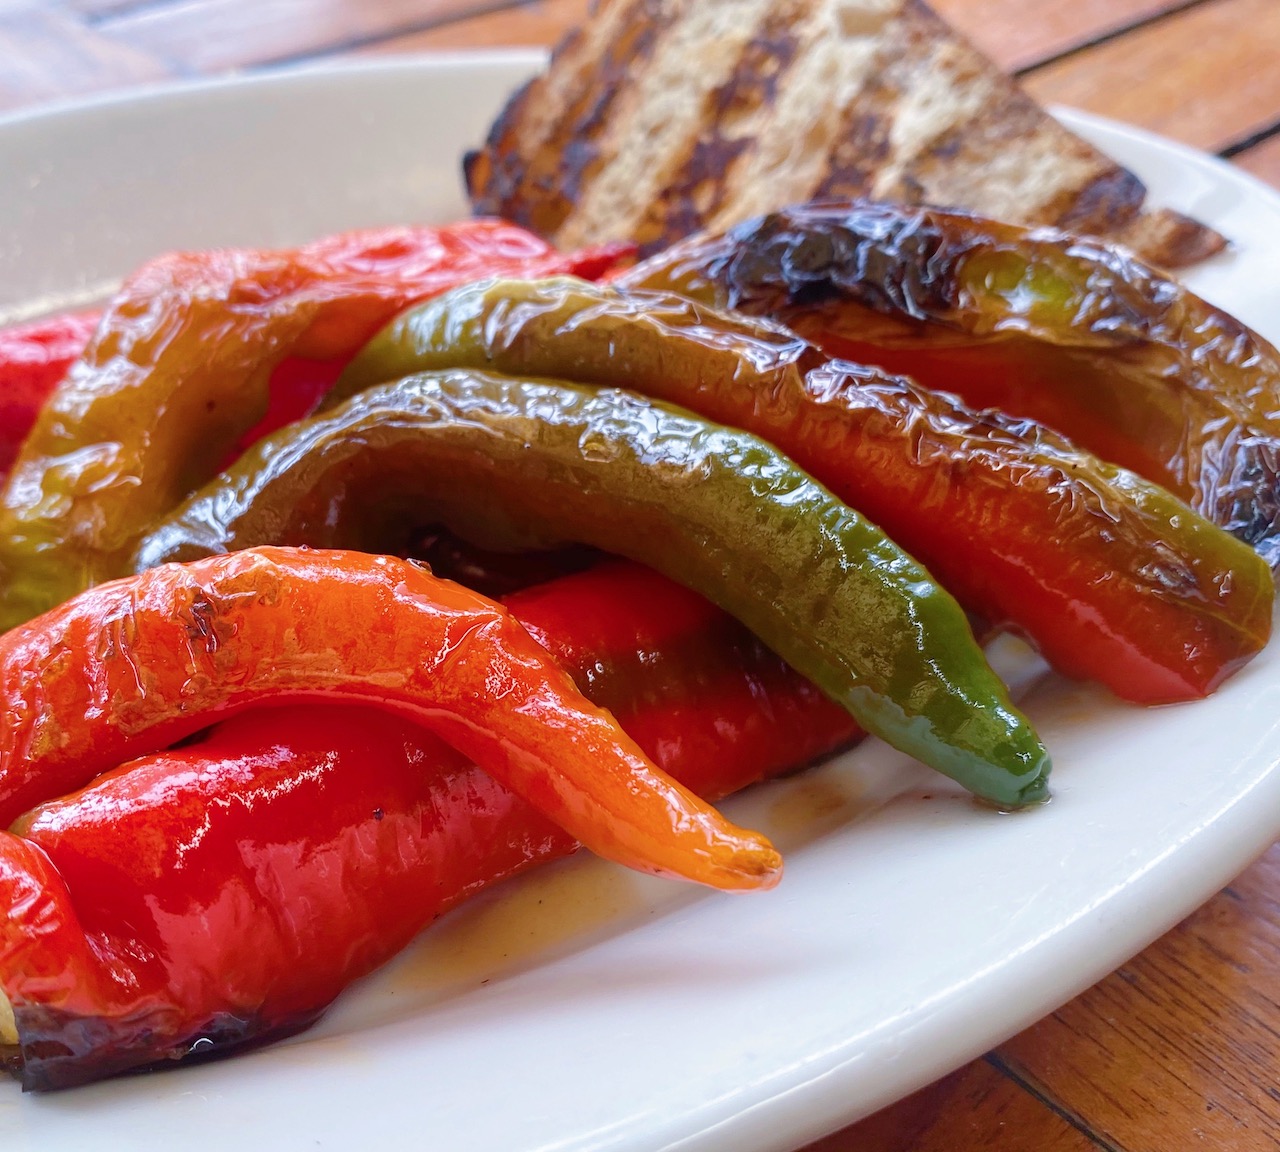 A plate of fried Jimmy Nardello peppers.